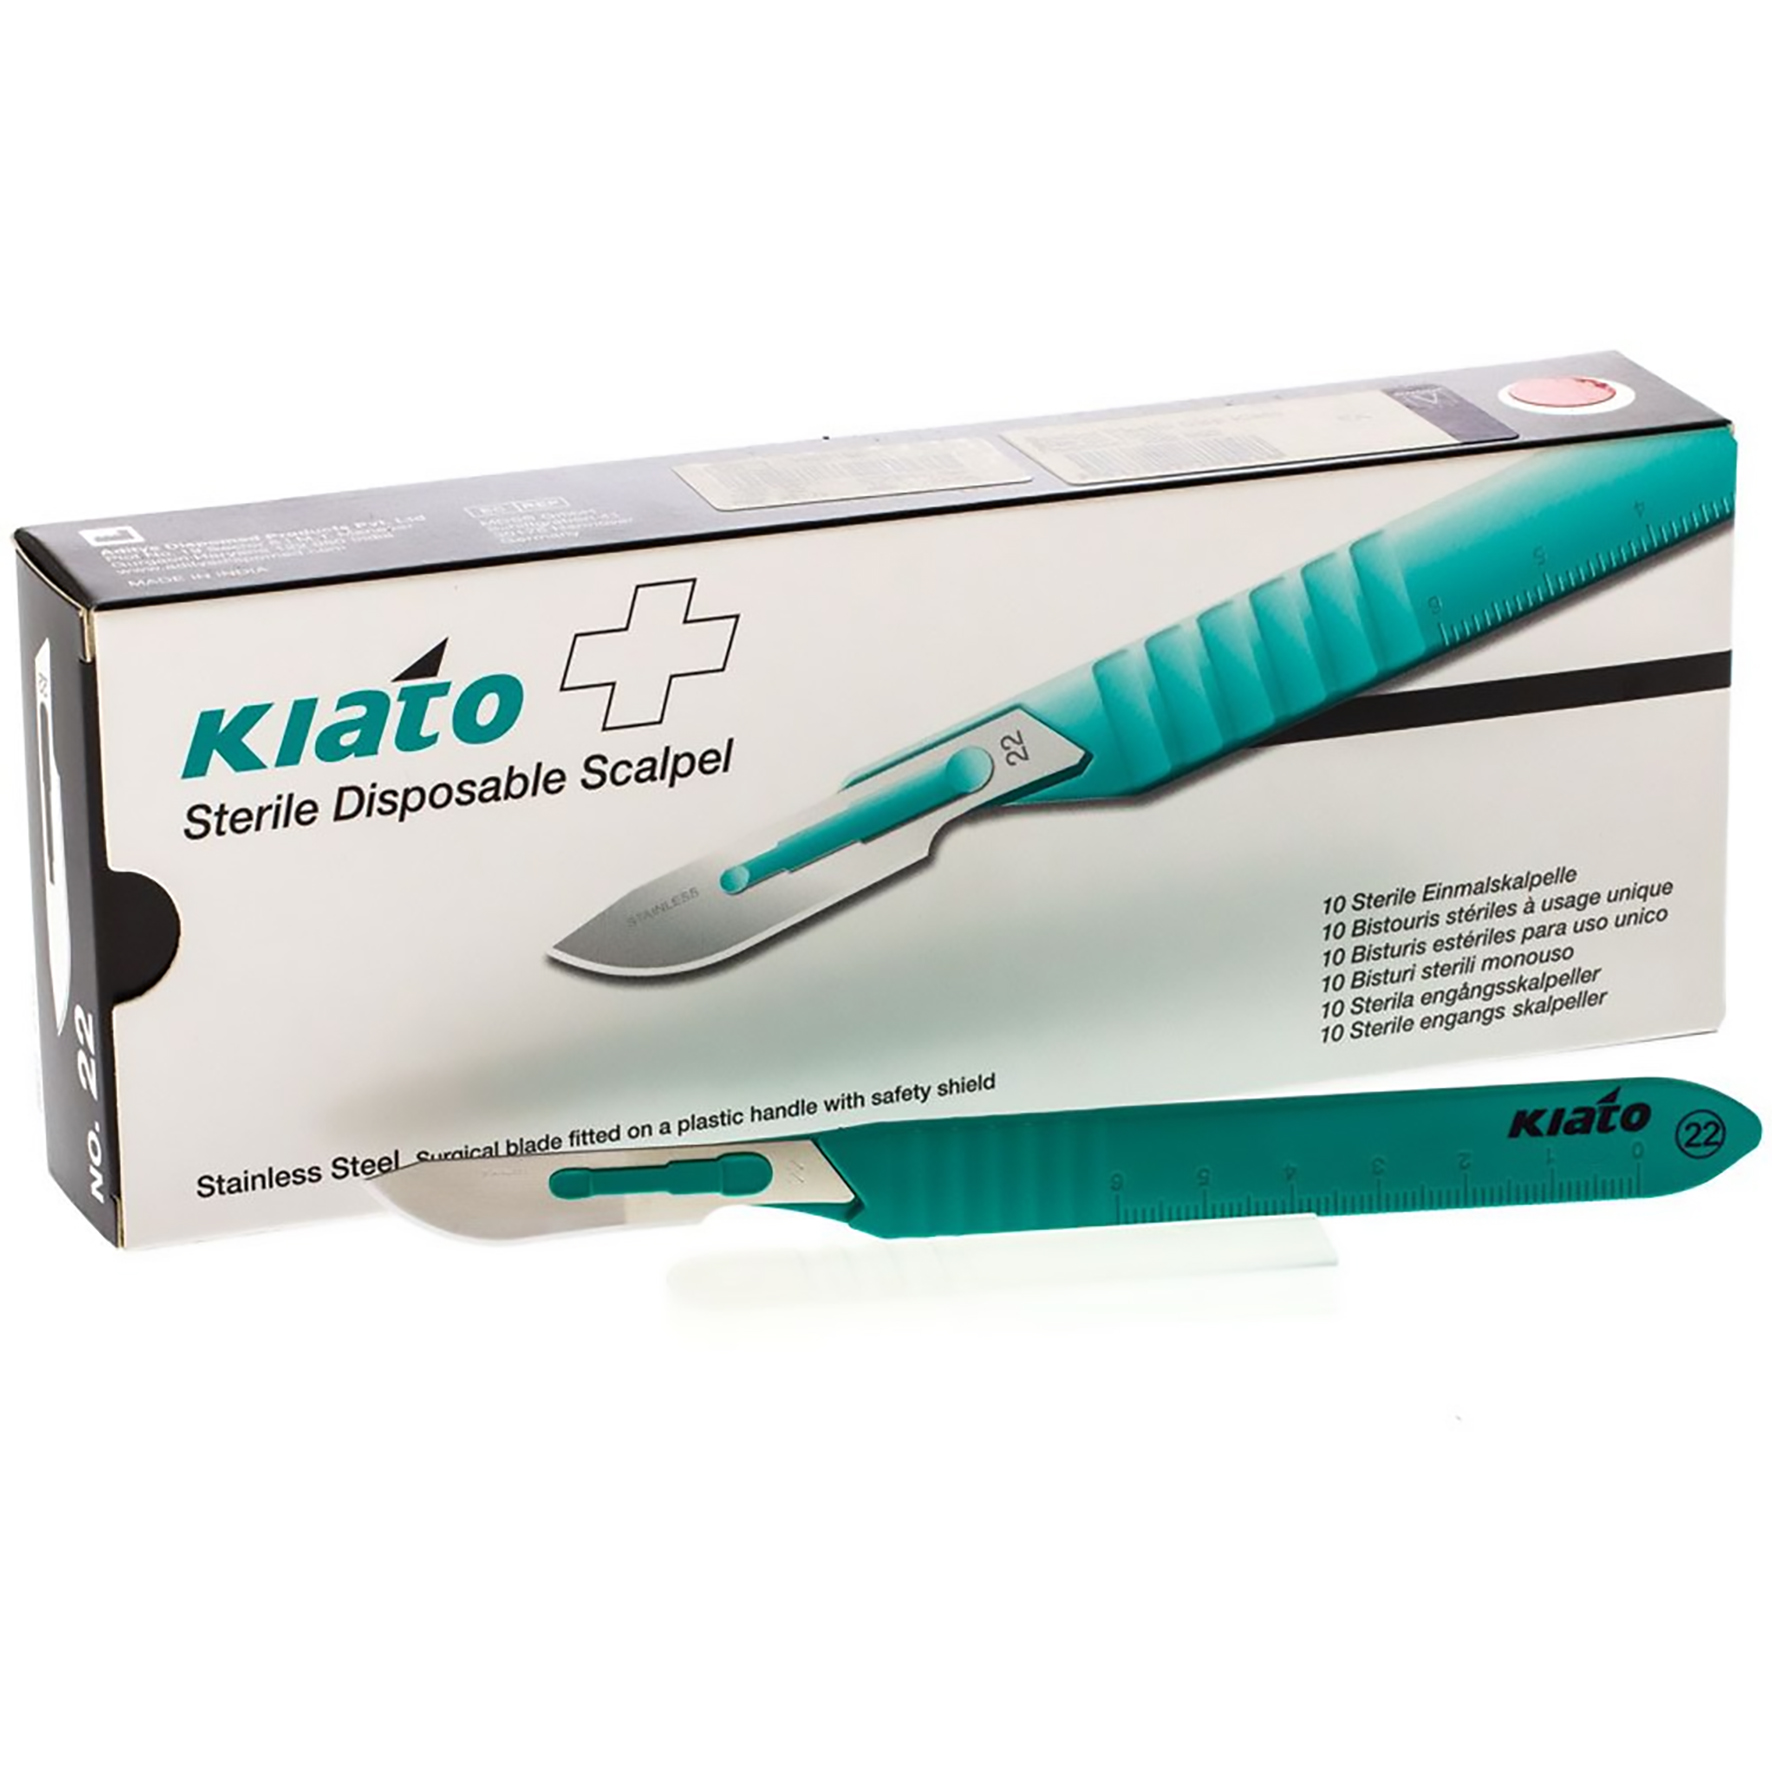 Kiato Disposable Sterile Scalpel Stainless Steel with Plastic Handle